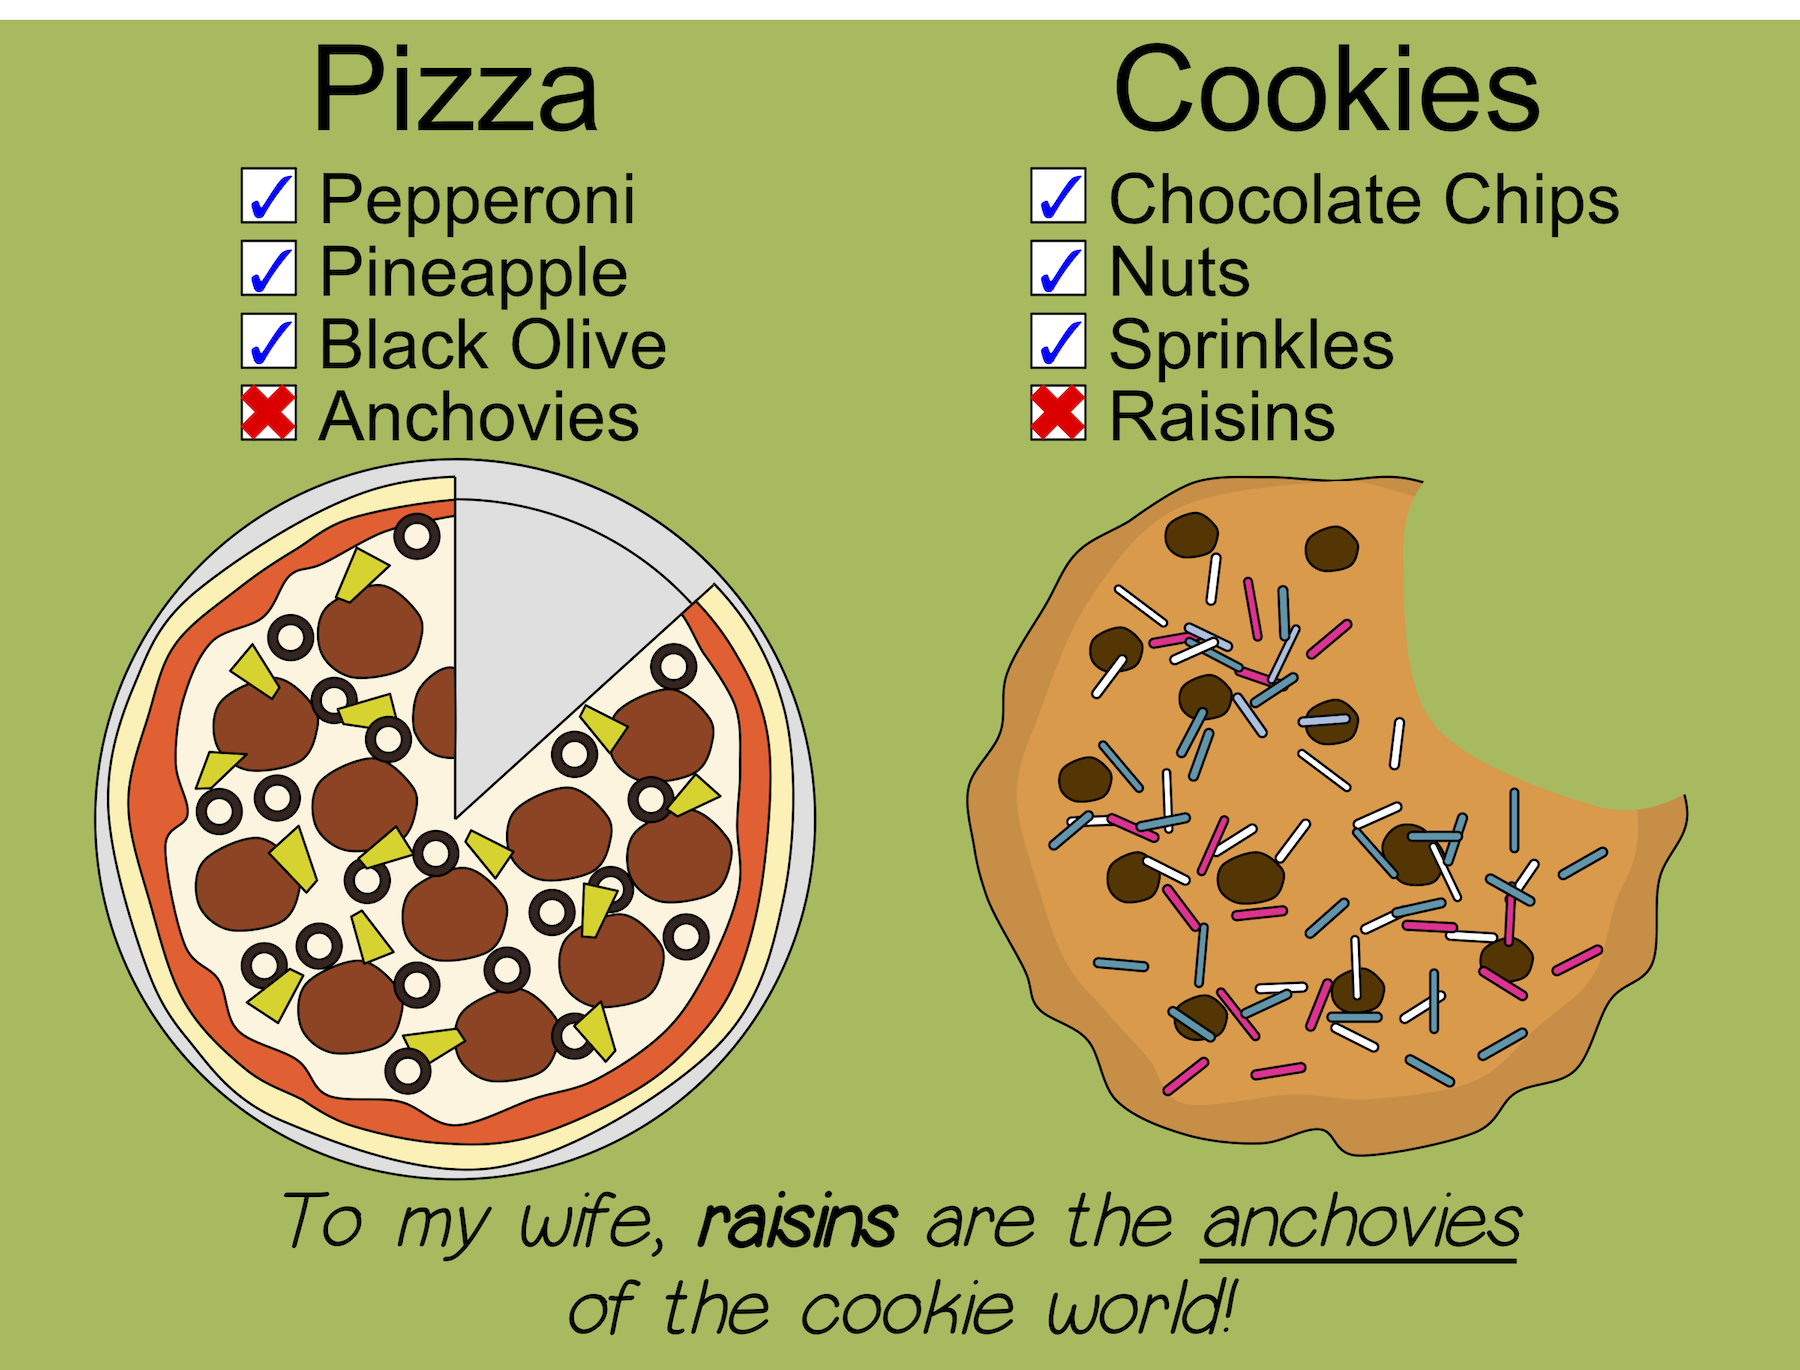 To my wife, raisins are the anchovies of the cookie world!